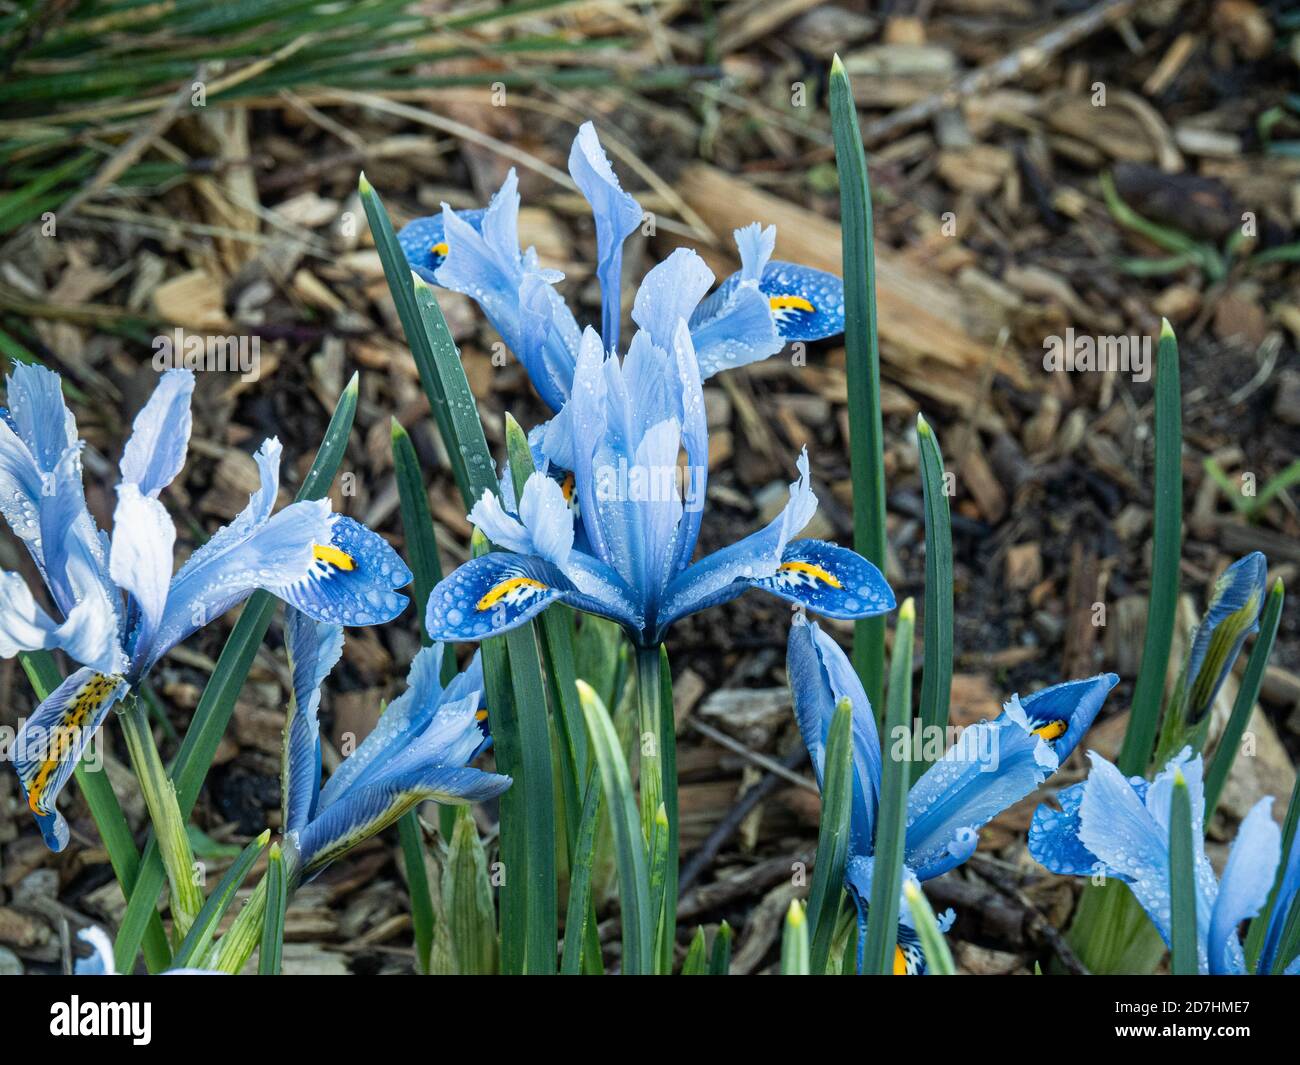 A small group of Iris reticulata Alida showing the pale blue petals with yellow centred fall Stock Photo